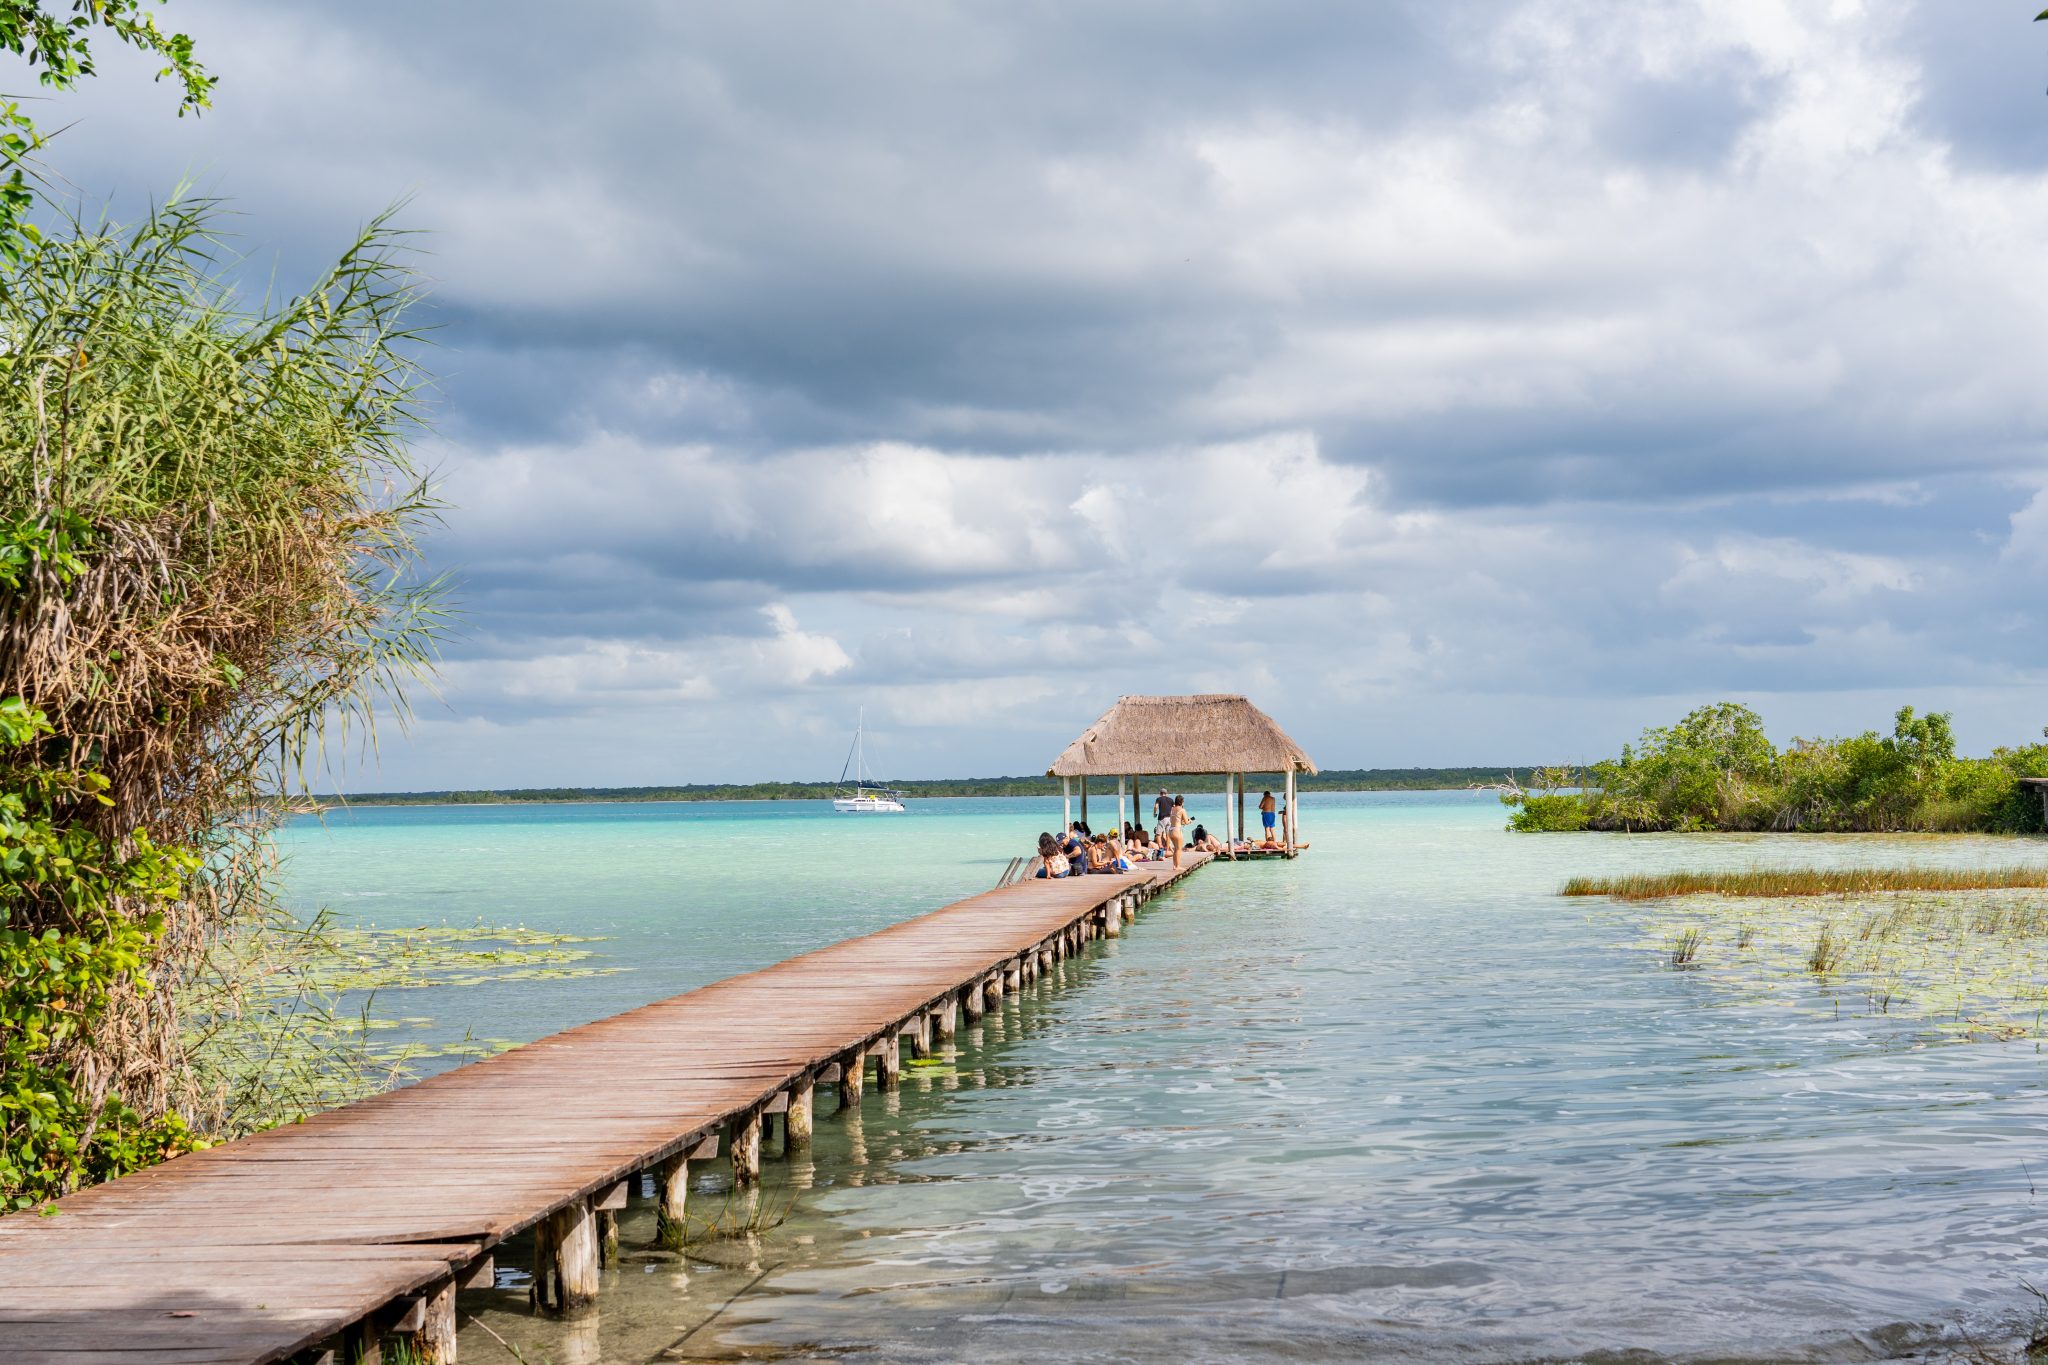 AVOID THE DAY CLUBS – ENTRY TO BACALAR LAGOON ON A BUDGET